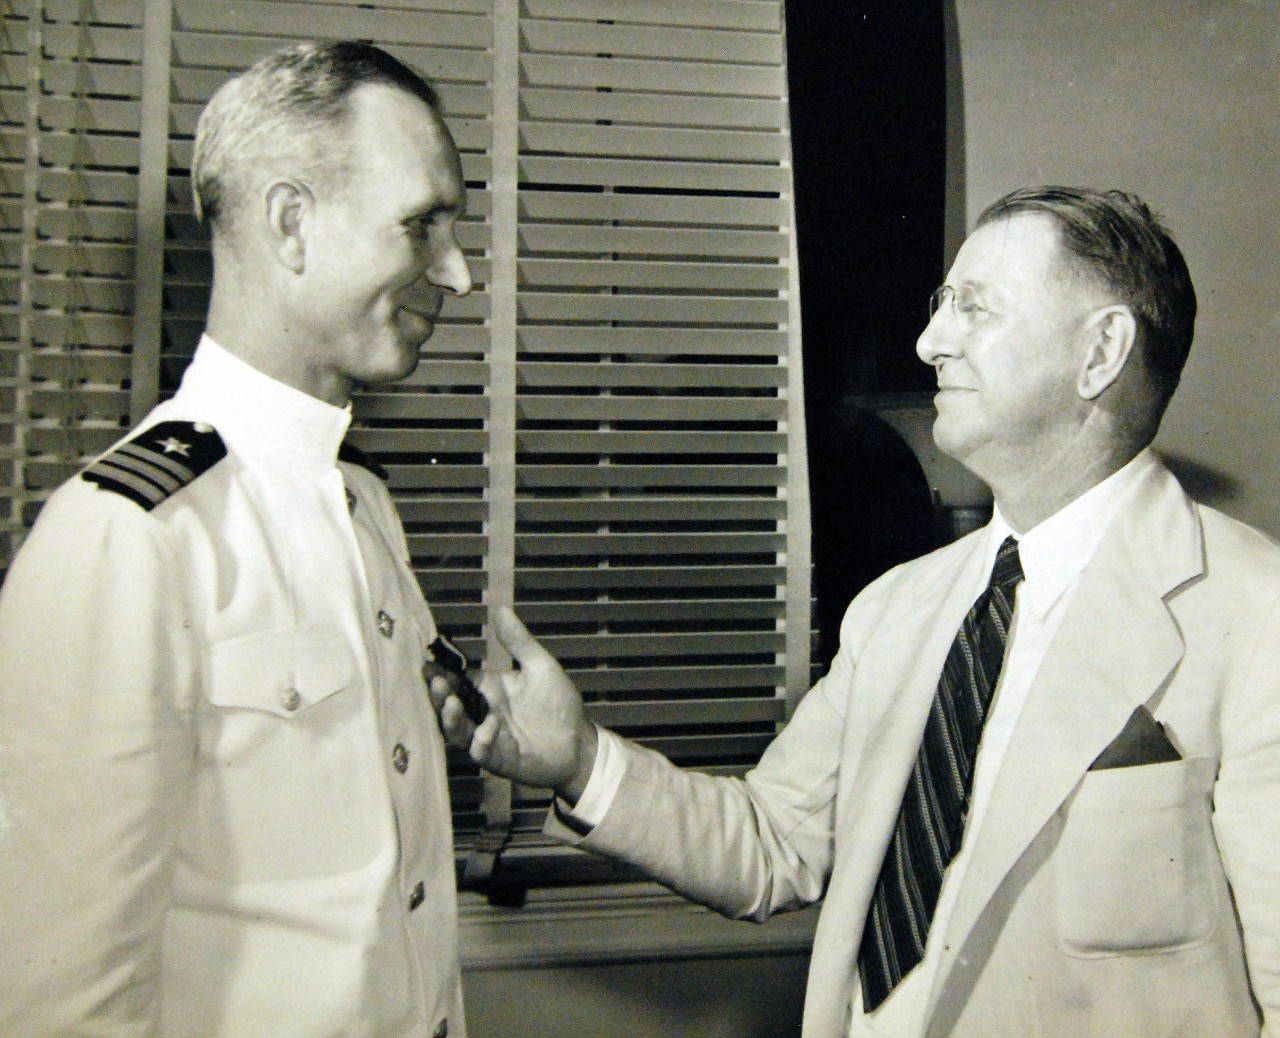 Lot-4263-32:  The Honorable Frank Knox, Secretary of the Navy, presents the Navy Cross to Commander Paul H. Talbot, USN, July 1l1, 1942.  Secretary of the Navy Frank Knox Collection.   Photographed through Mylar sleeve.  (2015/11/20).